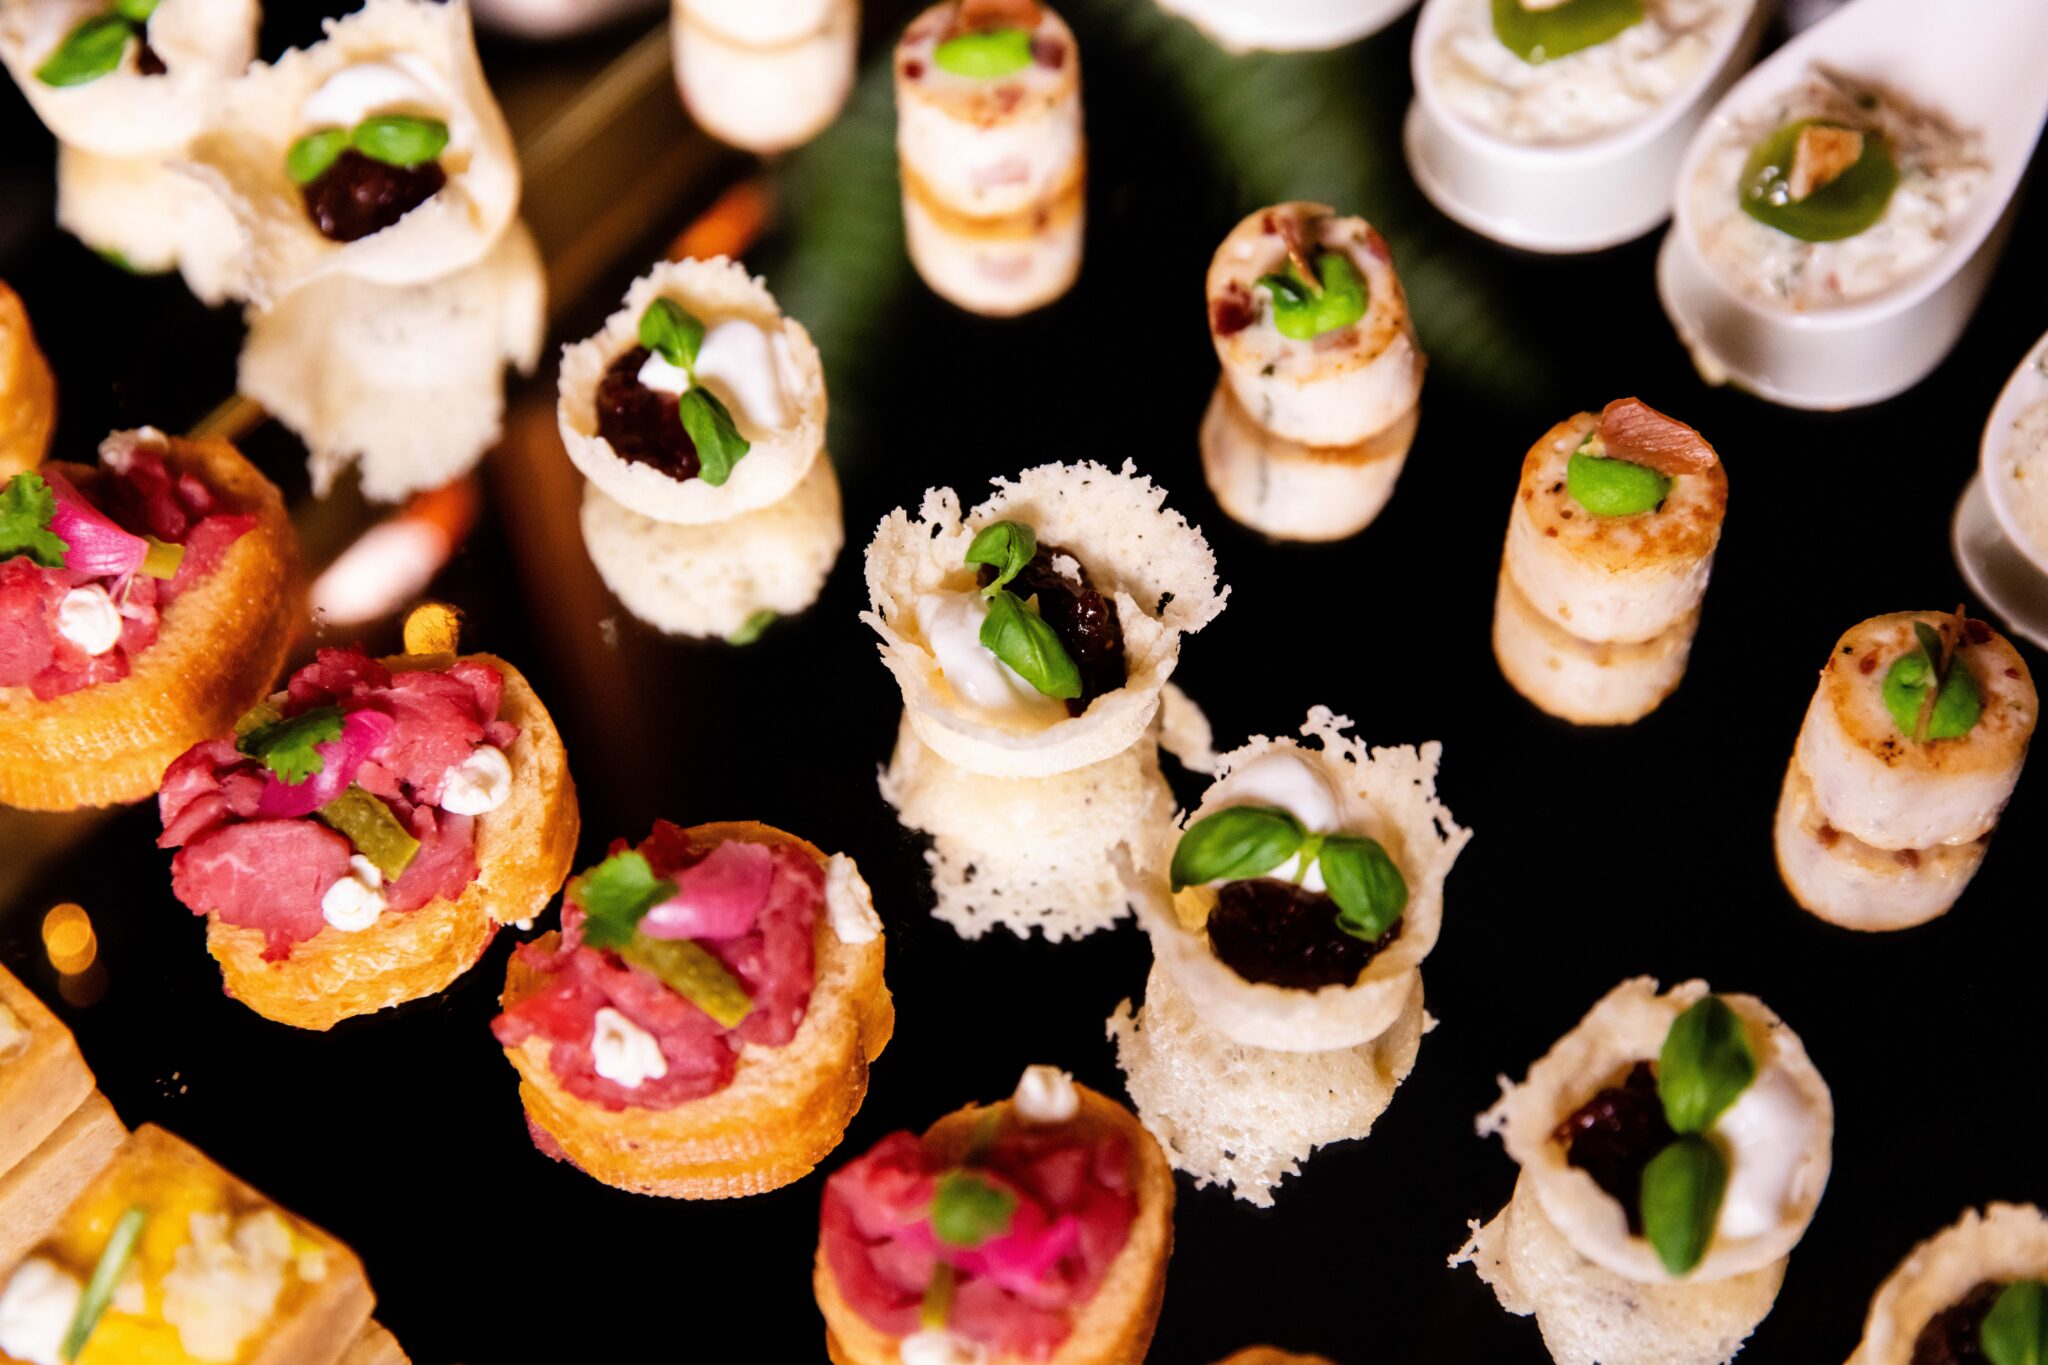 Image of the canapes from a birdseye view